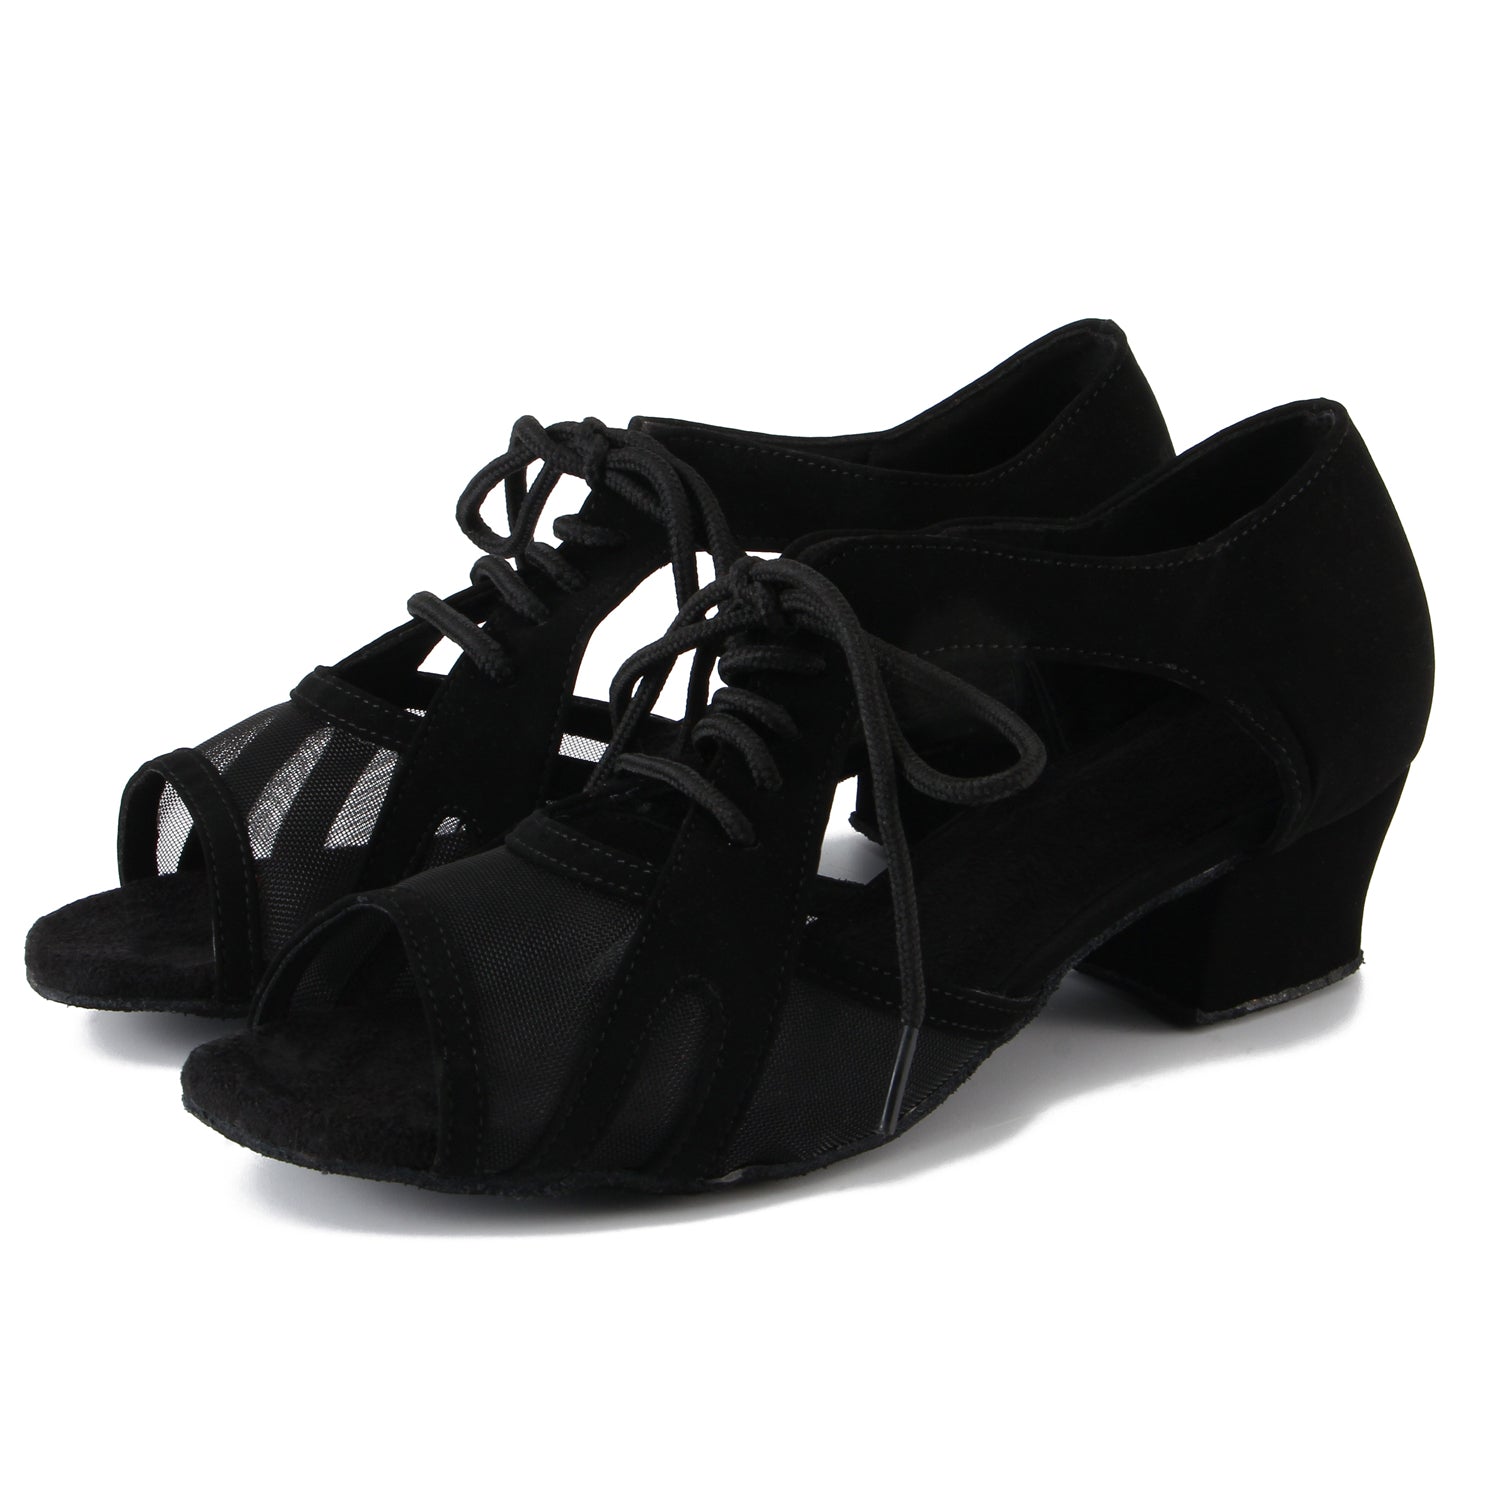 Women Ballroom Dancing Shoes with Suede Sole, Lace-up Open-toe Design in Black for Tango Latin Practice - PD-3002A8